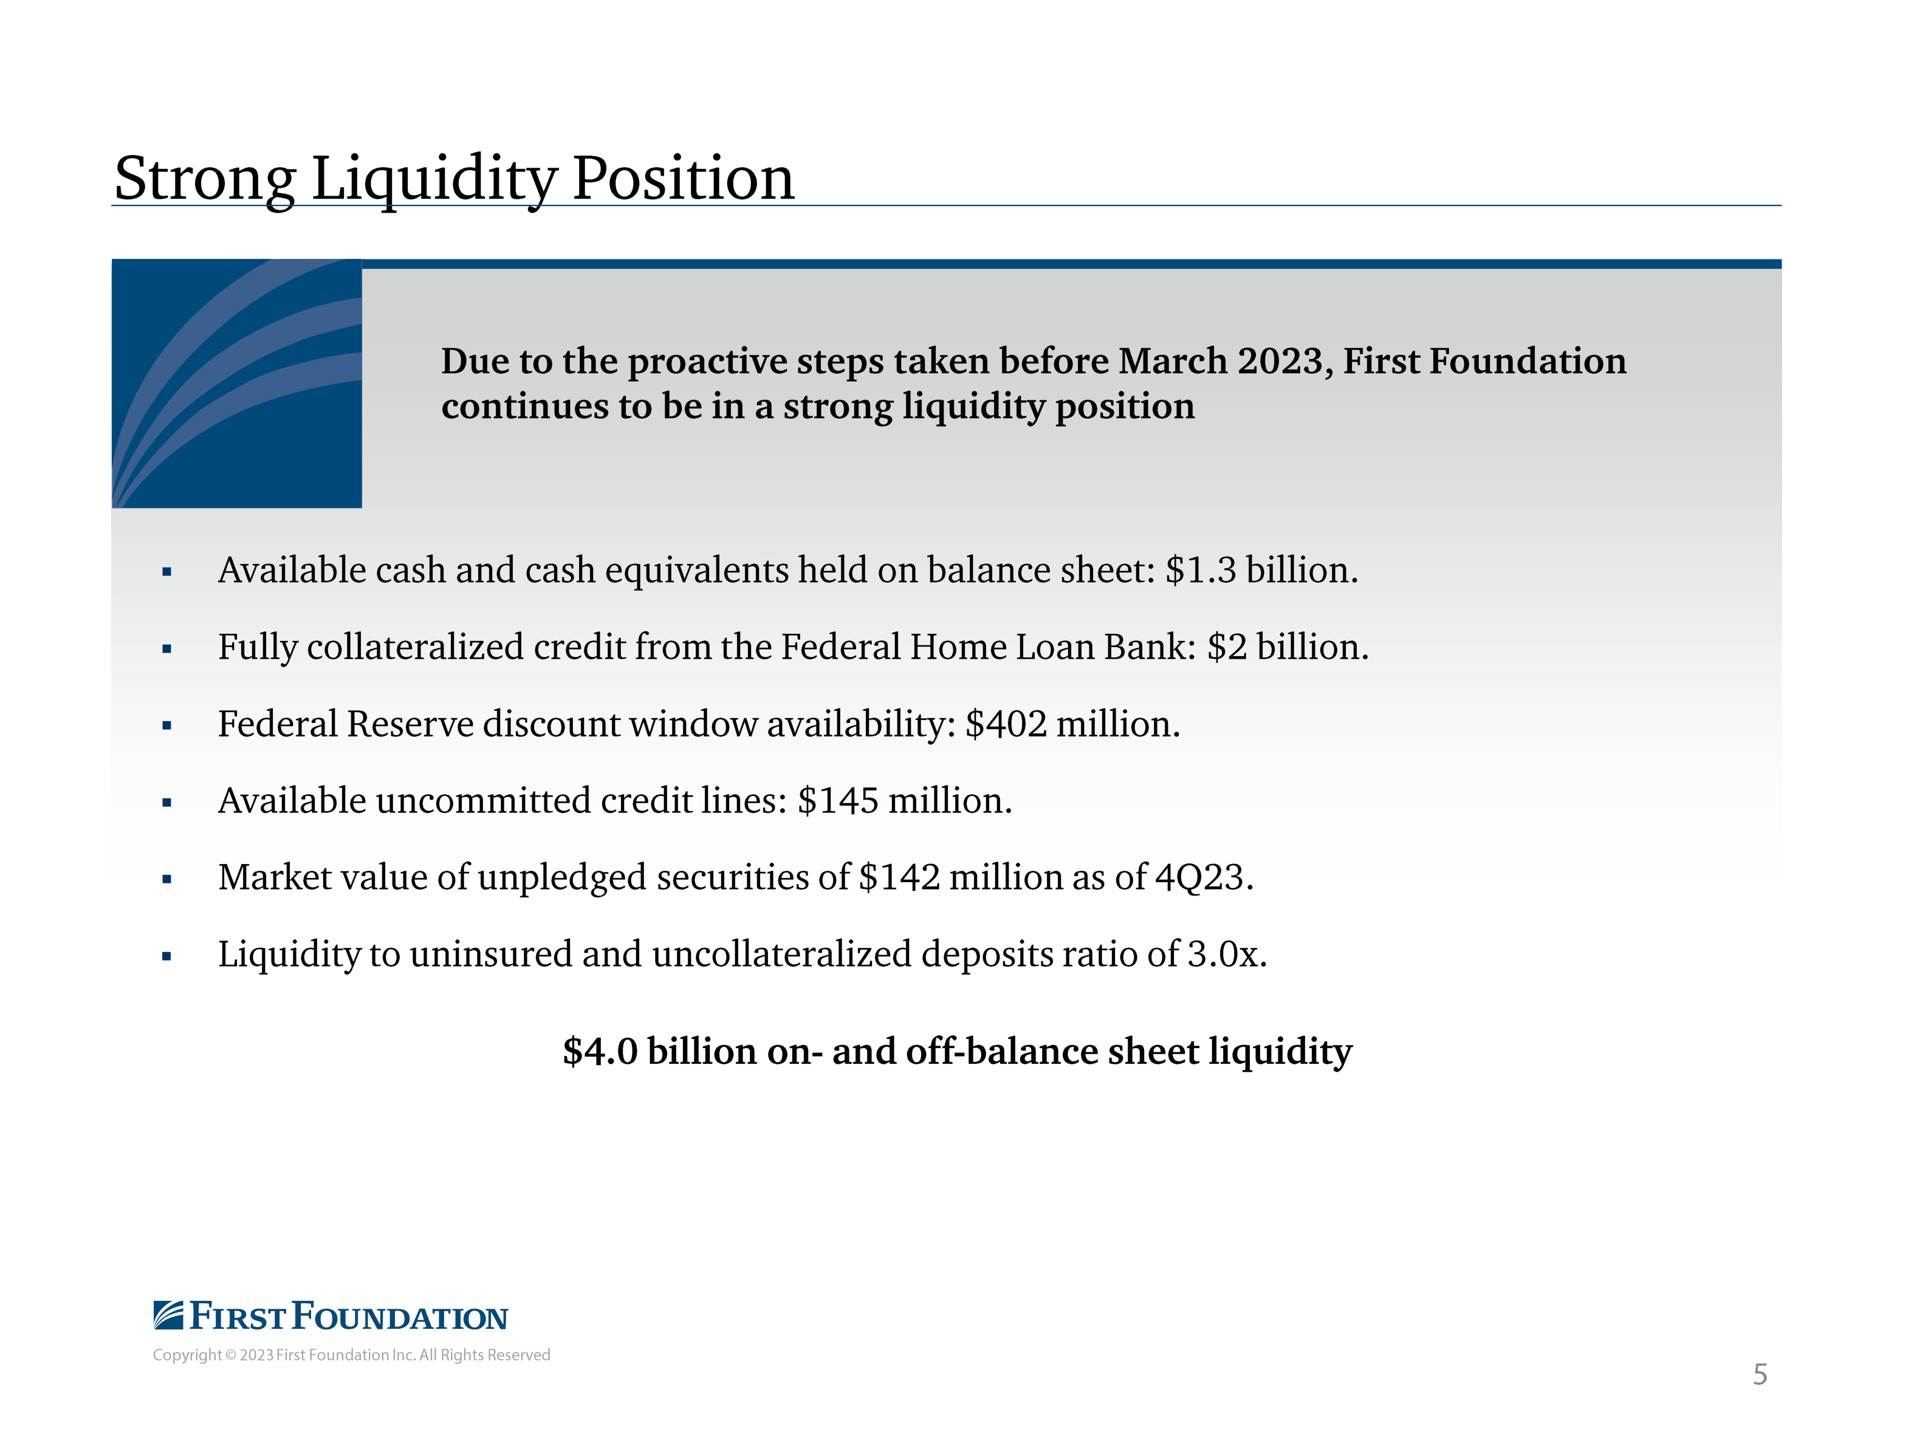 strong liquidity position federal reserve discount window availability million liquidity to uninsured and deposits ratio of billion on and off balance sheet liquidity | First Foundation